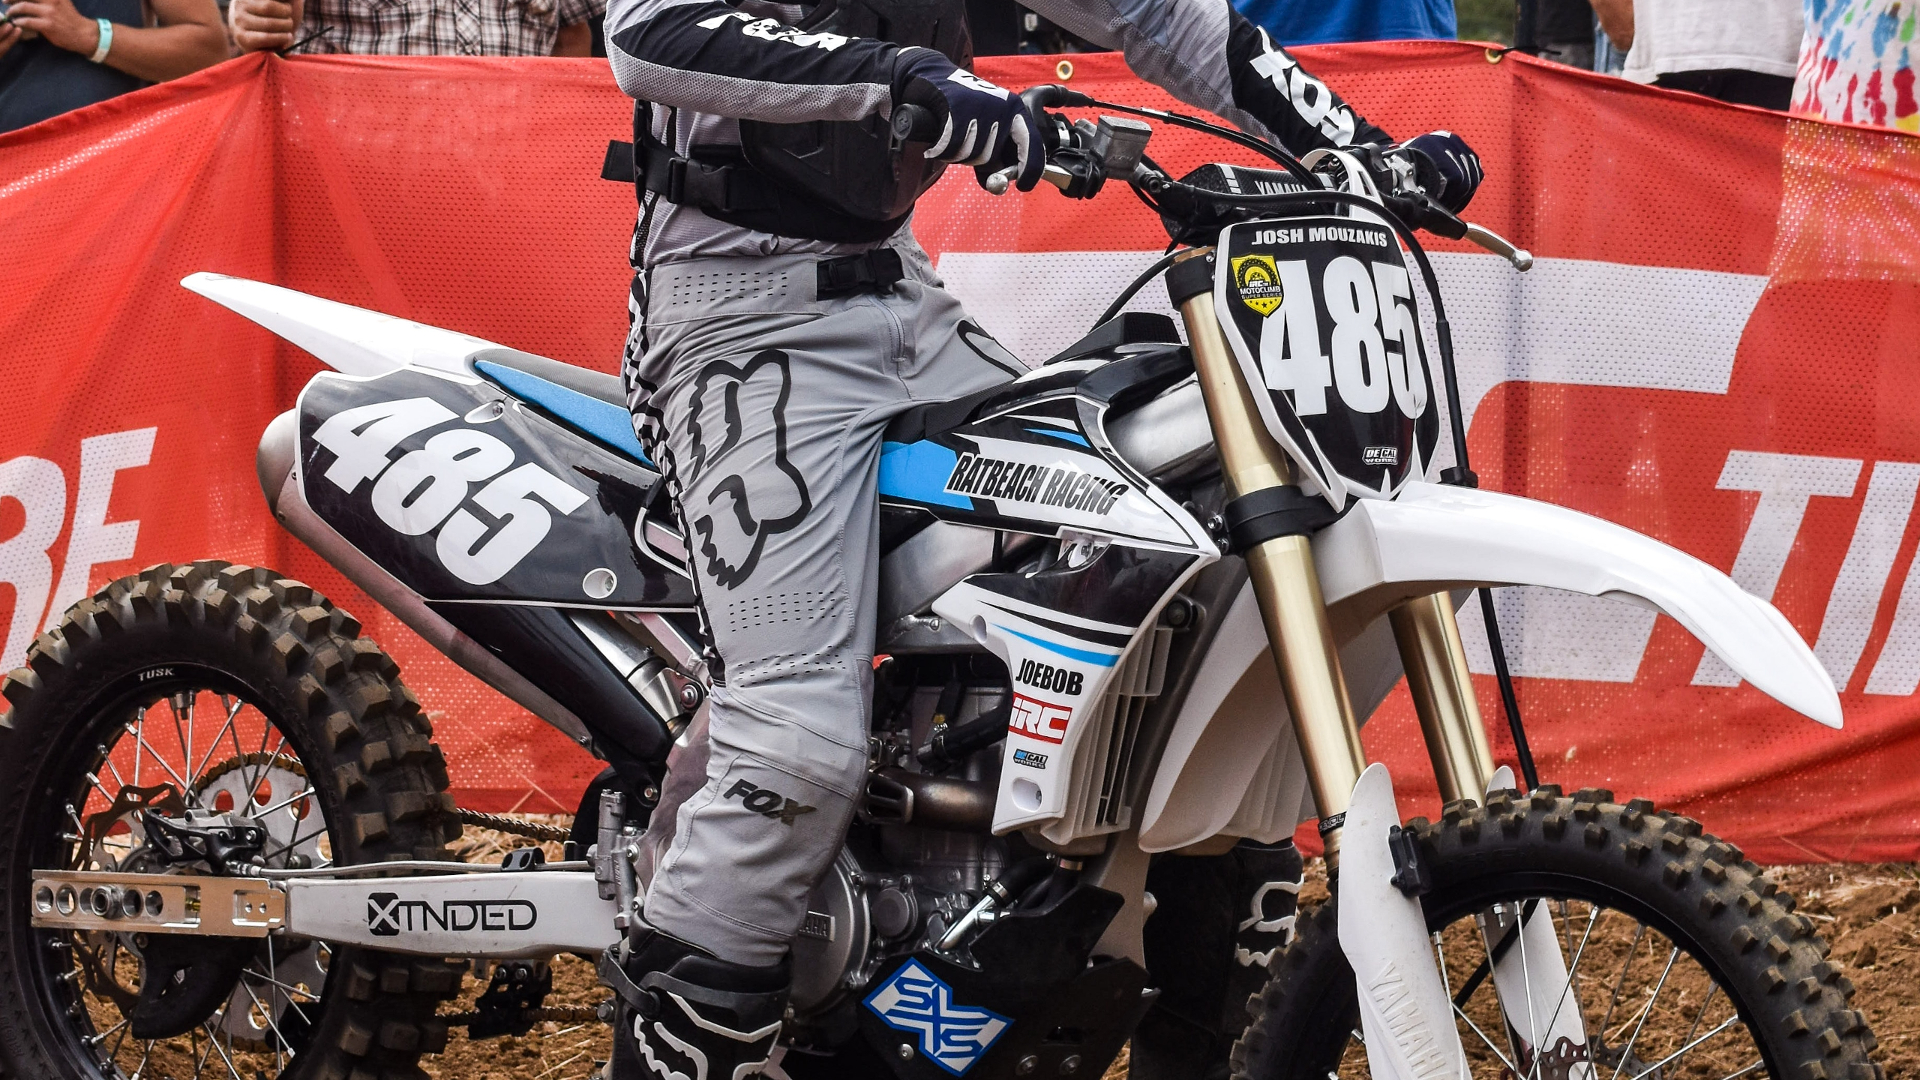 Hill-climb racer in the staging area wearing Fox Racing motocross pants